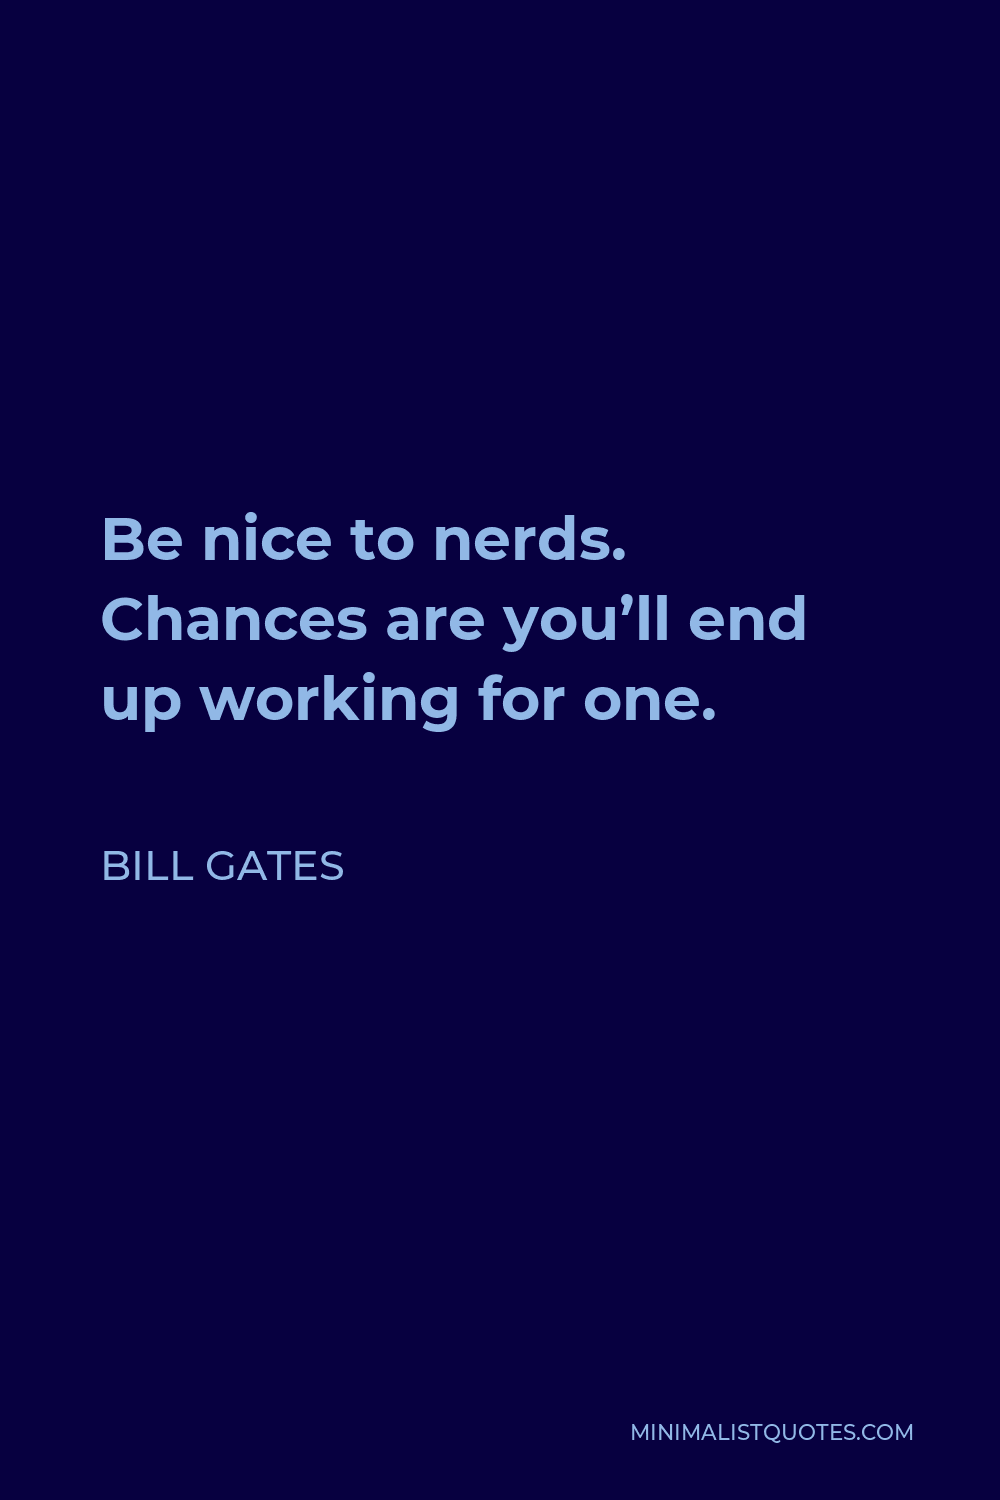 Bill Gates Quote - Be nice to nerds. Chances are you’ll end up working for one.